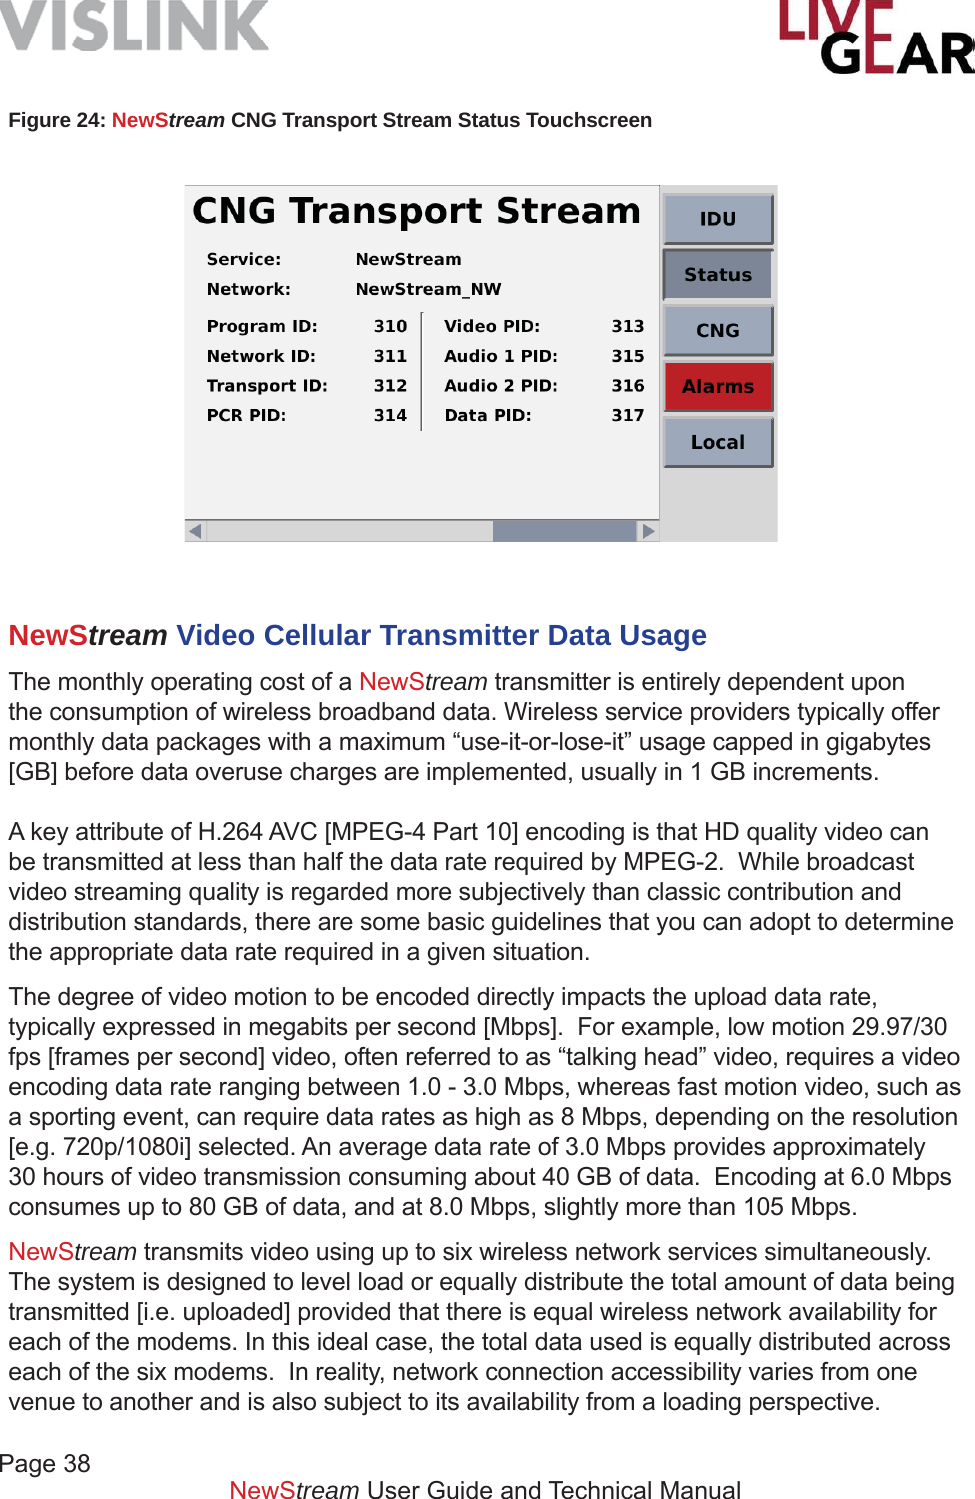 Page 38NewStream User Guide and Technical ManualFigure 24: NewStream CNG Transport Stream Status Touchscreen NewStream Video Cellular Transmitter Data UsageThe monthly operating cost of a NewStream transmitter is entirely dependent upon the consumption of wireless broadband data. Wireless service providers typically offer monthly data packages with a maximum “use-it-or-lose-it” usage capped in gigabytes [GB] before data overuse charges are implemented, usually in 1 GB increments.A key attribute of H.264 AVC [MPEG-4 Part 10] encoding is that HD quality video can be transmitted at less than half the data rate required by MPEG-2.  While broadcast video streaming quality is regarded more subjectively than classic contribution and distribution standards, there are some basic guidelines that you can adopt to determine the appropriate data rate required in a given situation.The degree of video motion to be encoded directly impacts the upload data rate, typically expressed in megabits per second [Mbps].  For example, low motion 29.97/30 fps [frames per second] video, often referred to as “talking head” video, requires a video encoding data rate ranging between 1.0 - 3.0 Mbps, whereas fast motion video, such as a sporting event, can require data rates as high as 8 Mbps, depending on the resolution [e.g. 720p/1080i] selected. An average data rate of 3.0 Mbps provides approximately 30 hours of video transmission consuming about 40 GB of data.  Encoding at 6.0 Mbps consumes up to 80 GB of data, and at 8.0 Mbps, slightly more than 105 Mbps. NewStream transmits video using up to six wireless network services simultaneously.  The system is designed to level load or equally distribute the total amount of data being transmitted [i.e. uploaded] provided that there is equal wireless network availability for each of the modems. In this ideal case, the total data used is equally distributed across each of the six modems.  In reality, network connection accessibility varies from one venue to another and is also subject to its availability from a loading perspective.